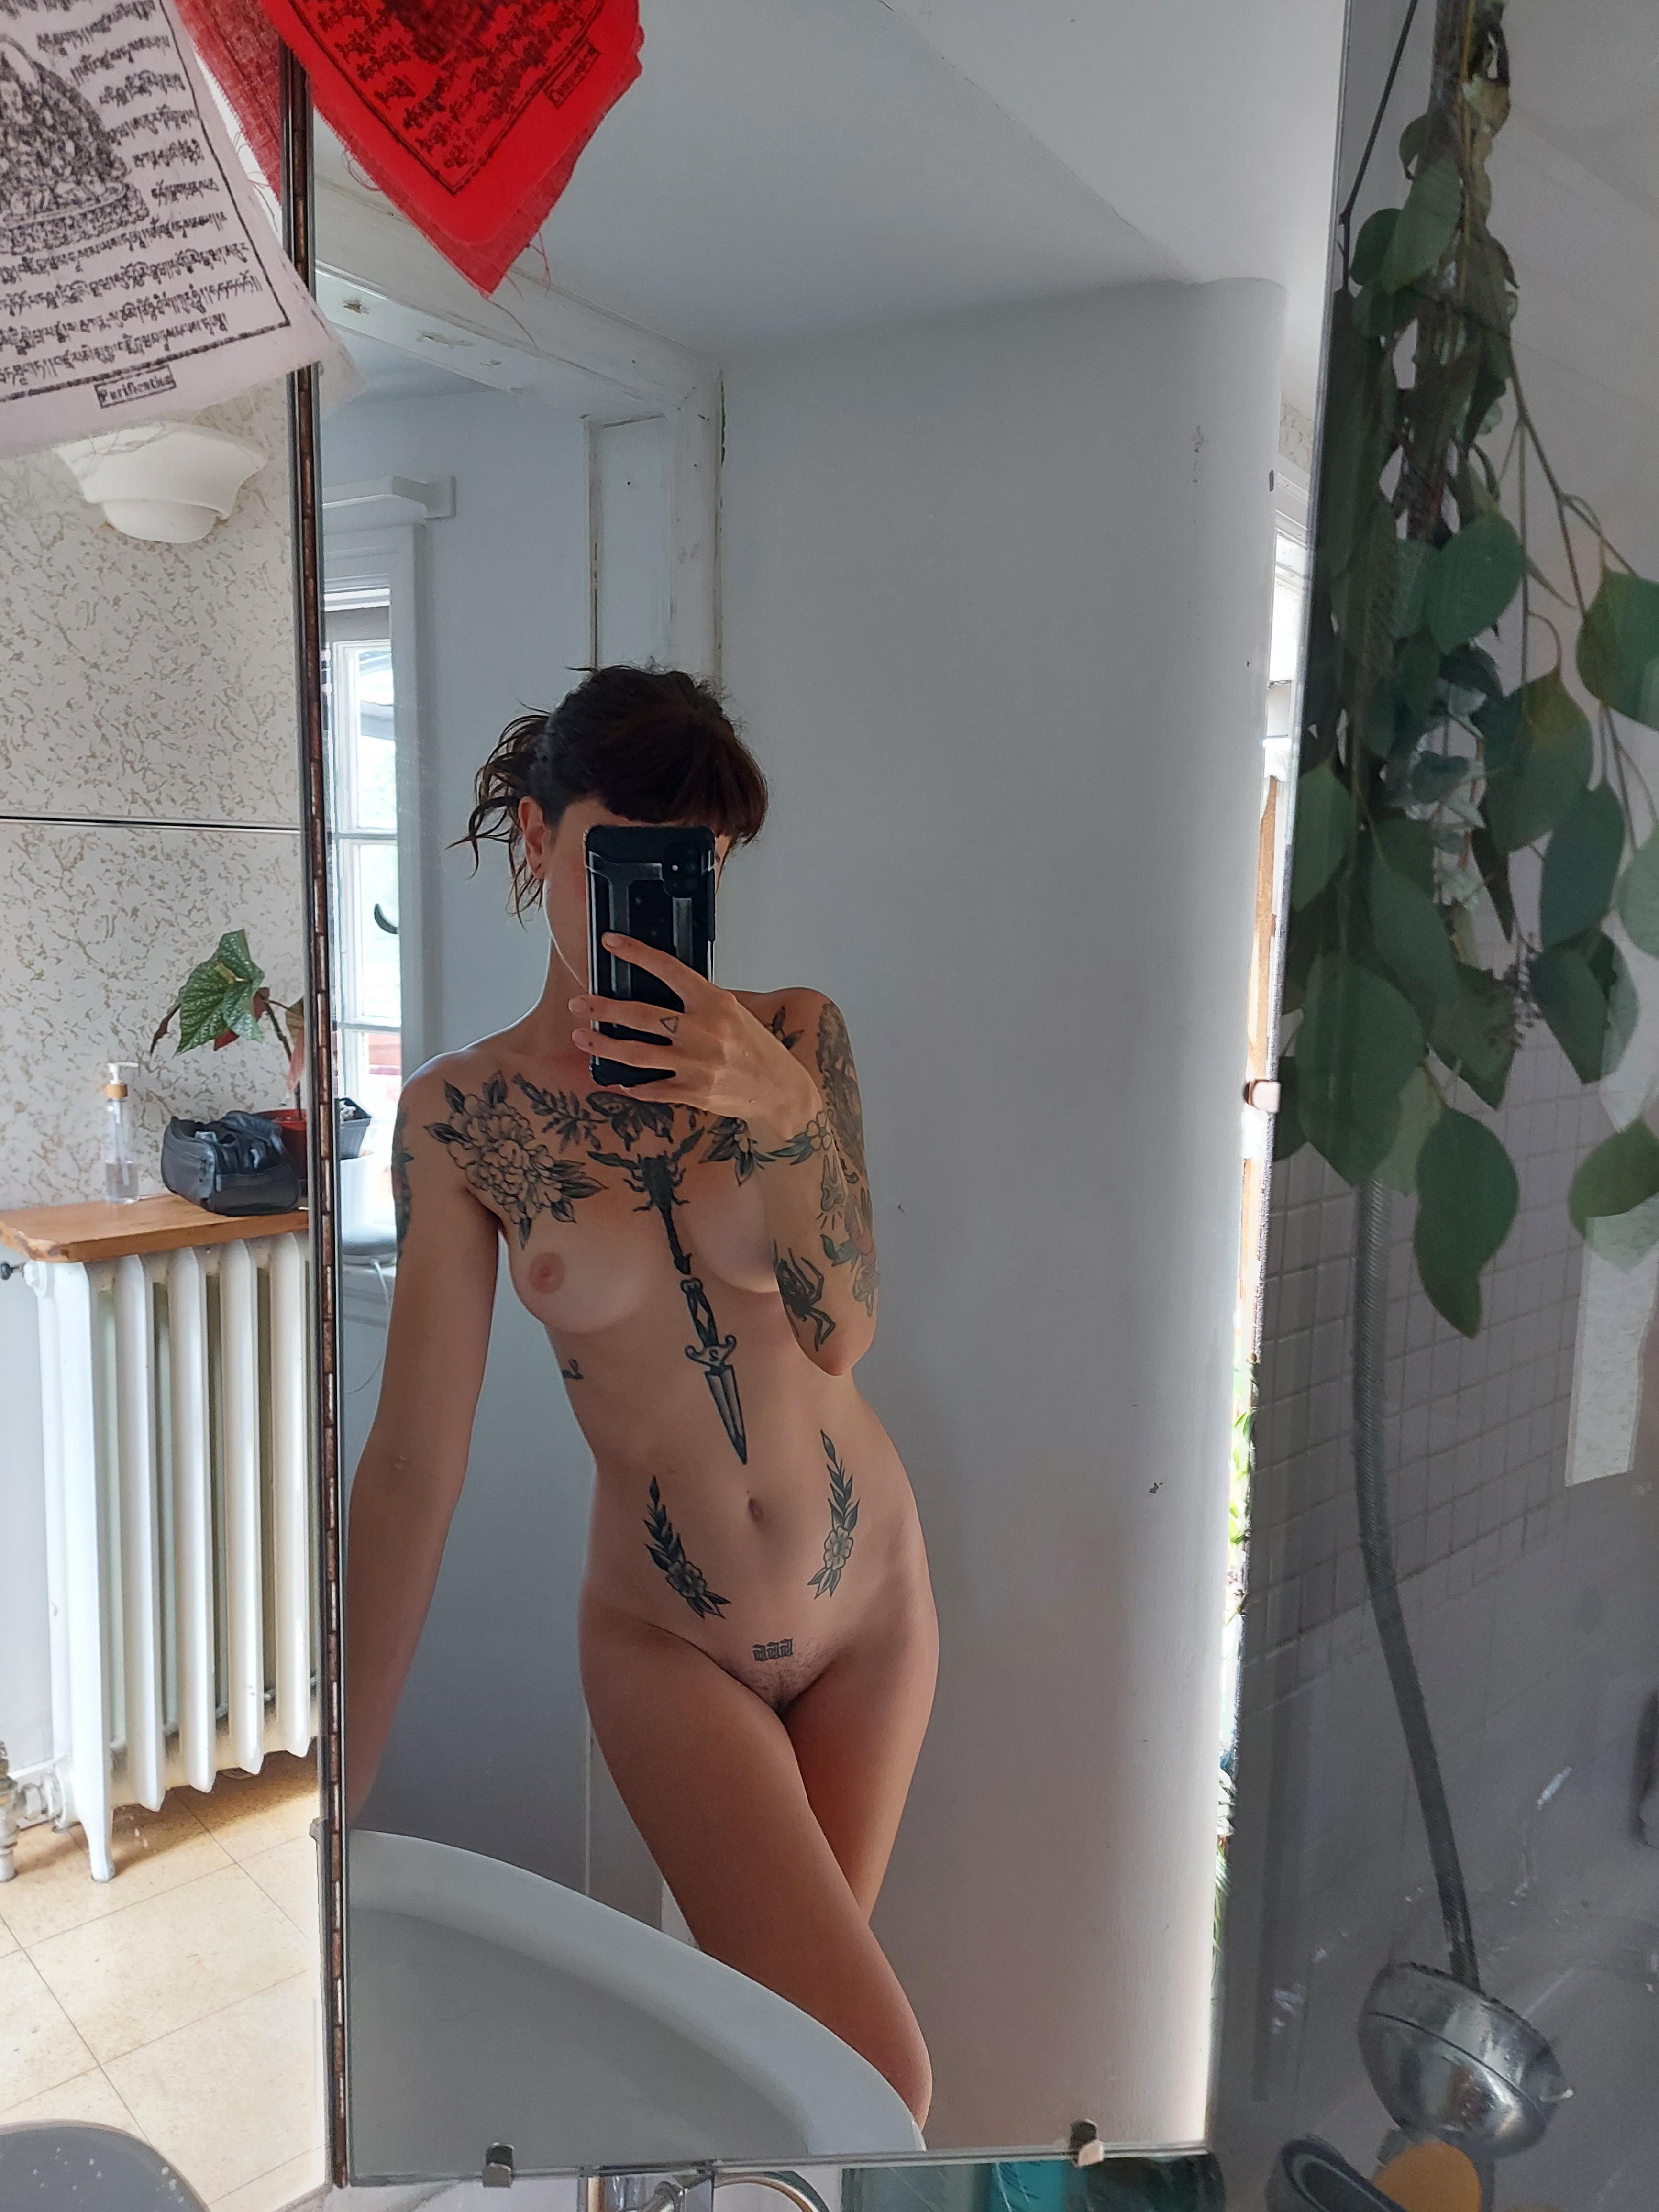 Naked Group Mirror Selfie - Its a nude mirror selfie kind of day